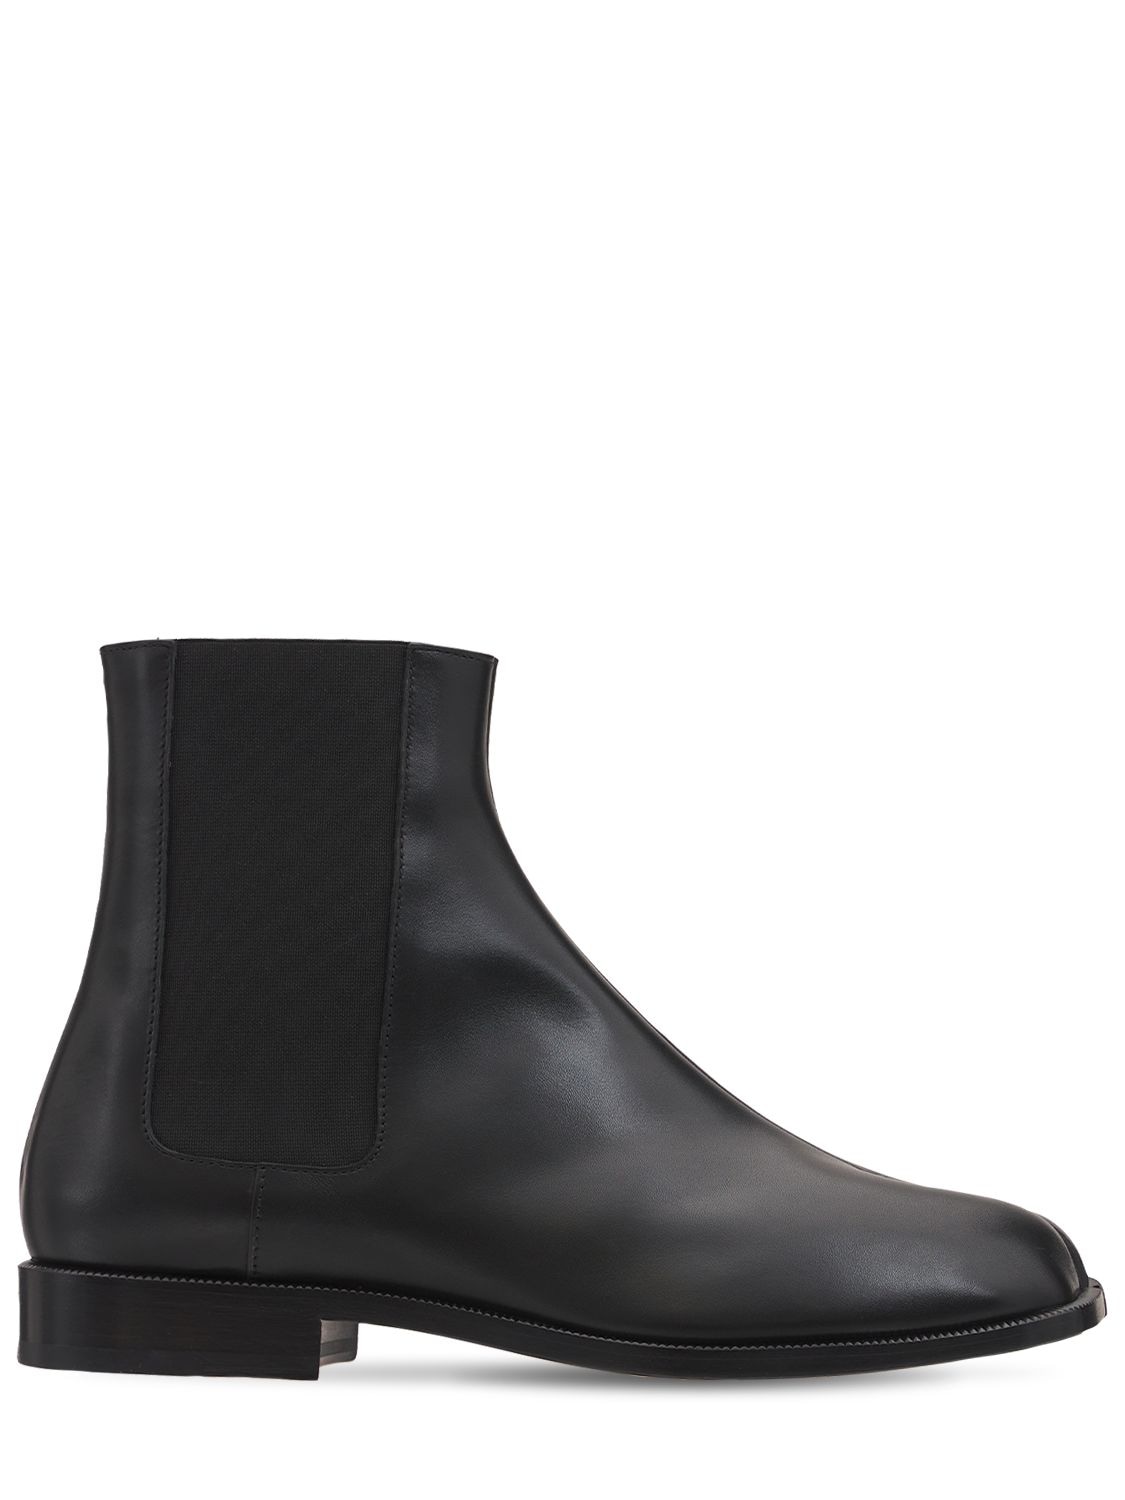 Tabi Leather Chelsea Boots